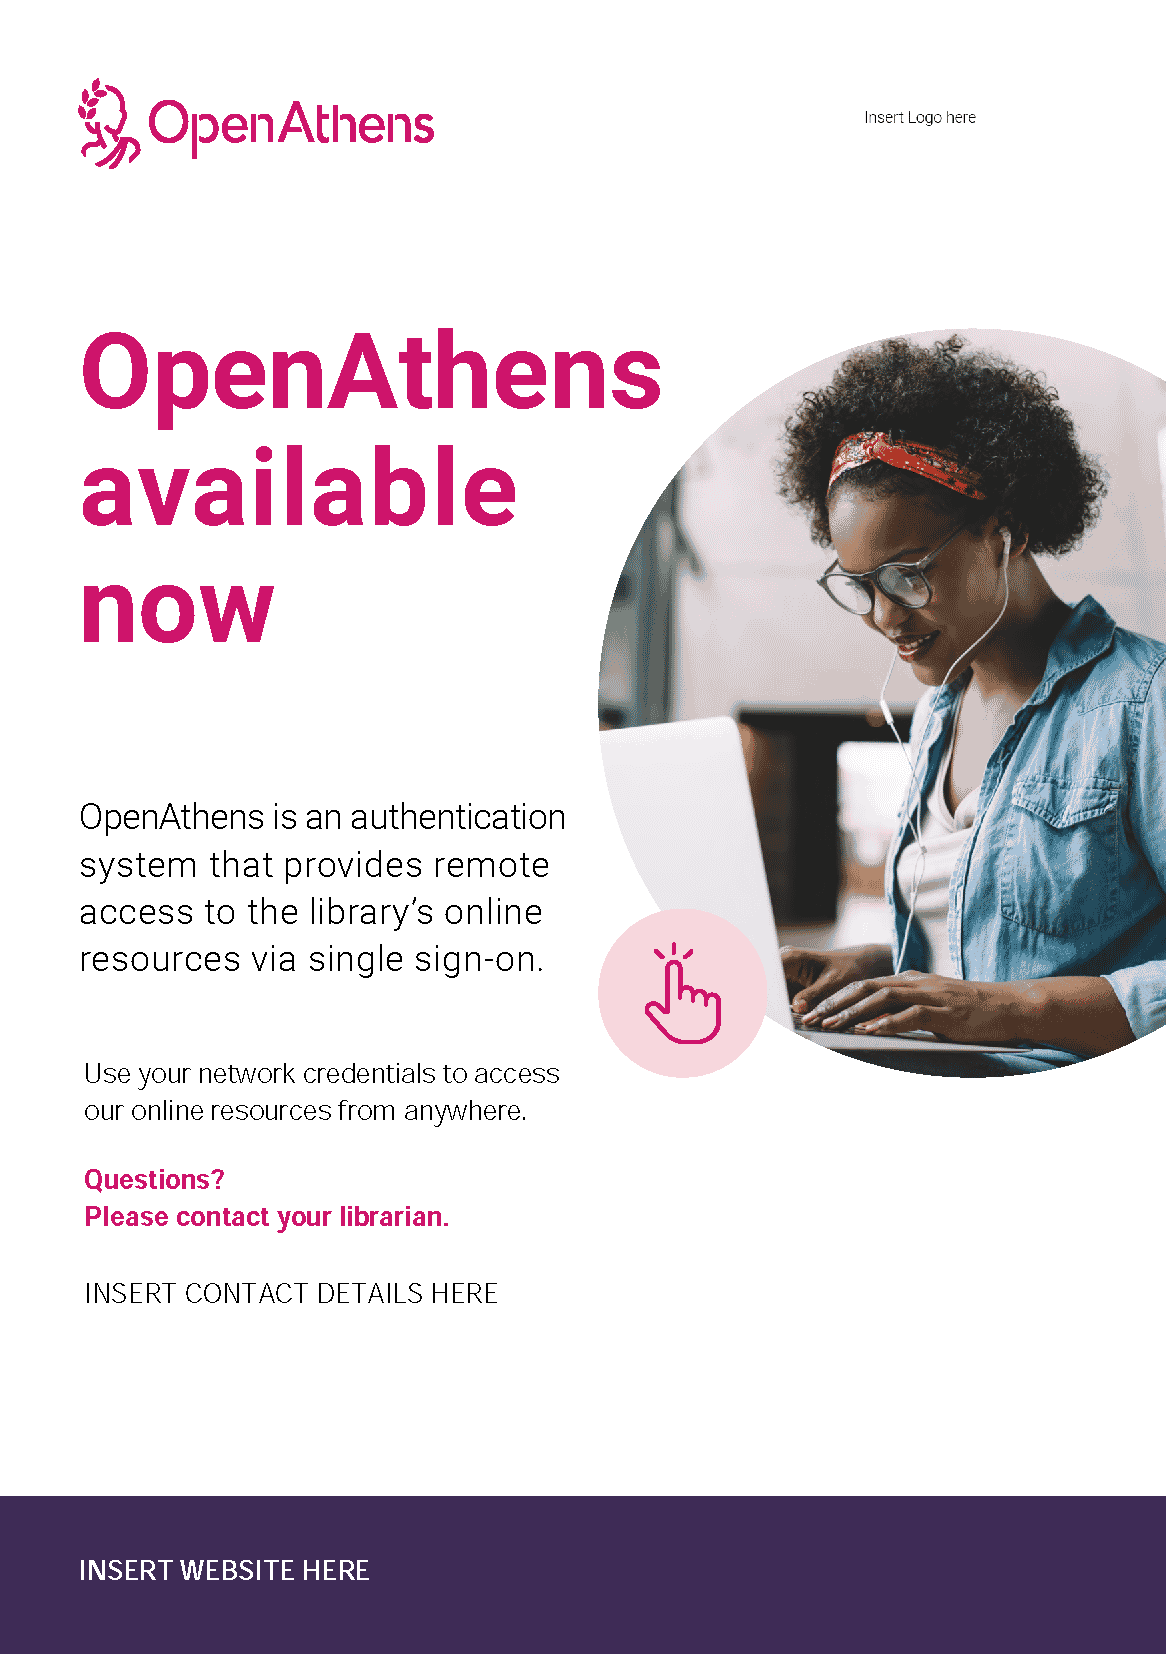 Screenshot of an editable OpenAthens promotional poster.